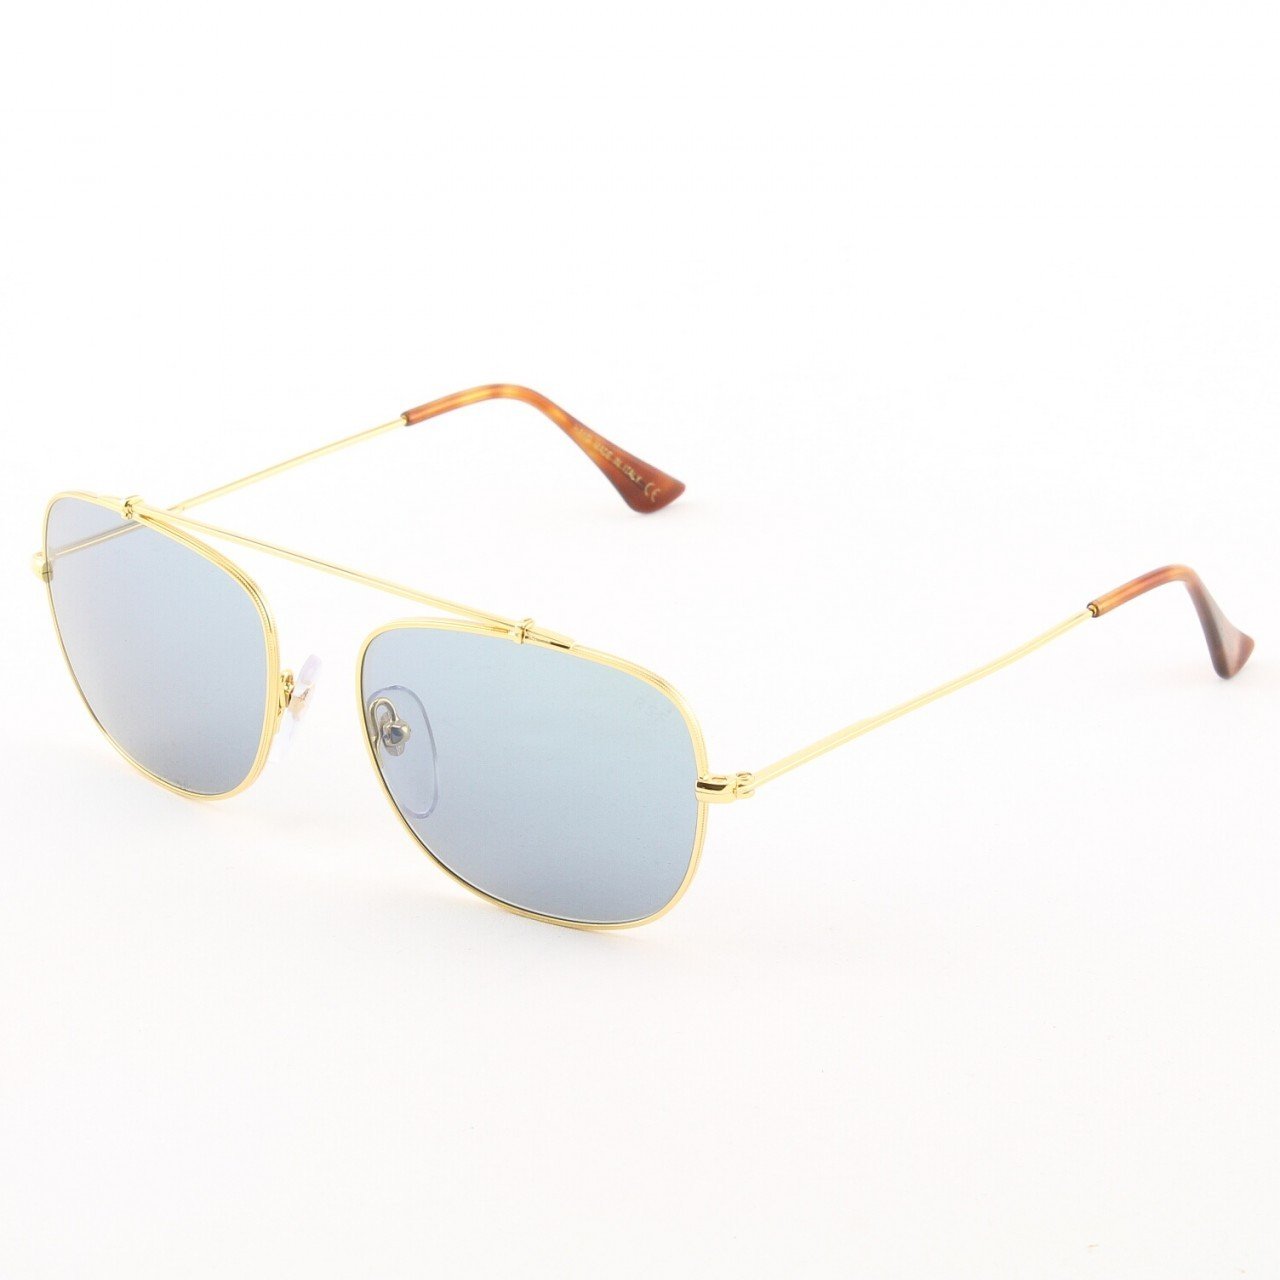 Super Primo 725/2M Sunglasses Gold Brown Havana with Blue Zeiss Lenses ...